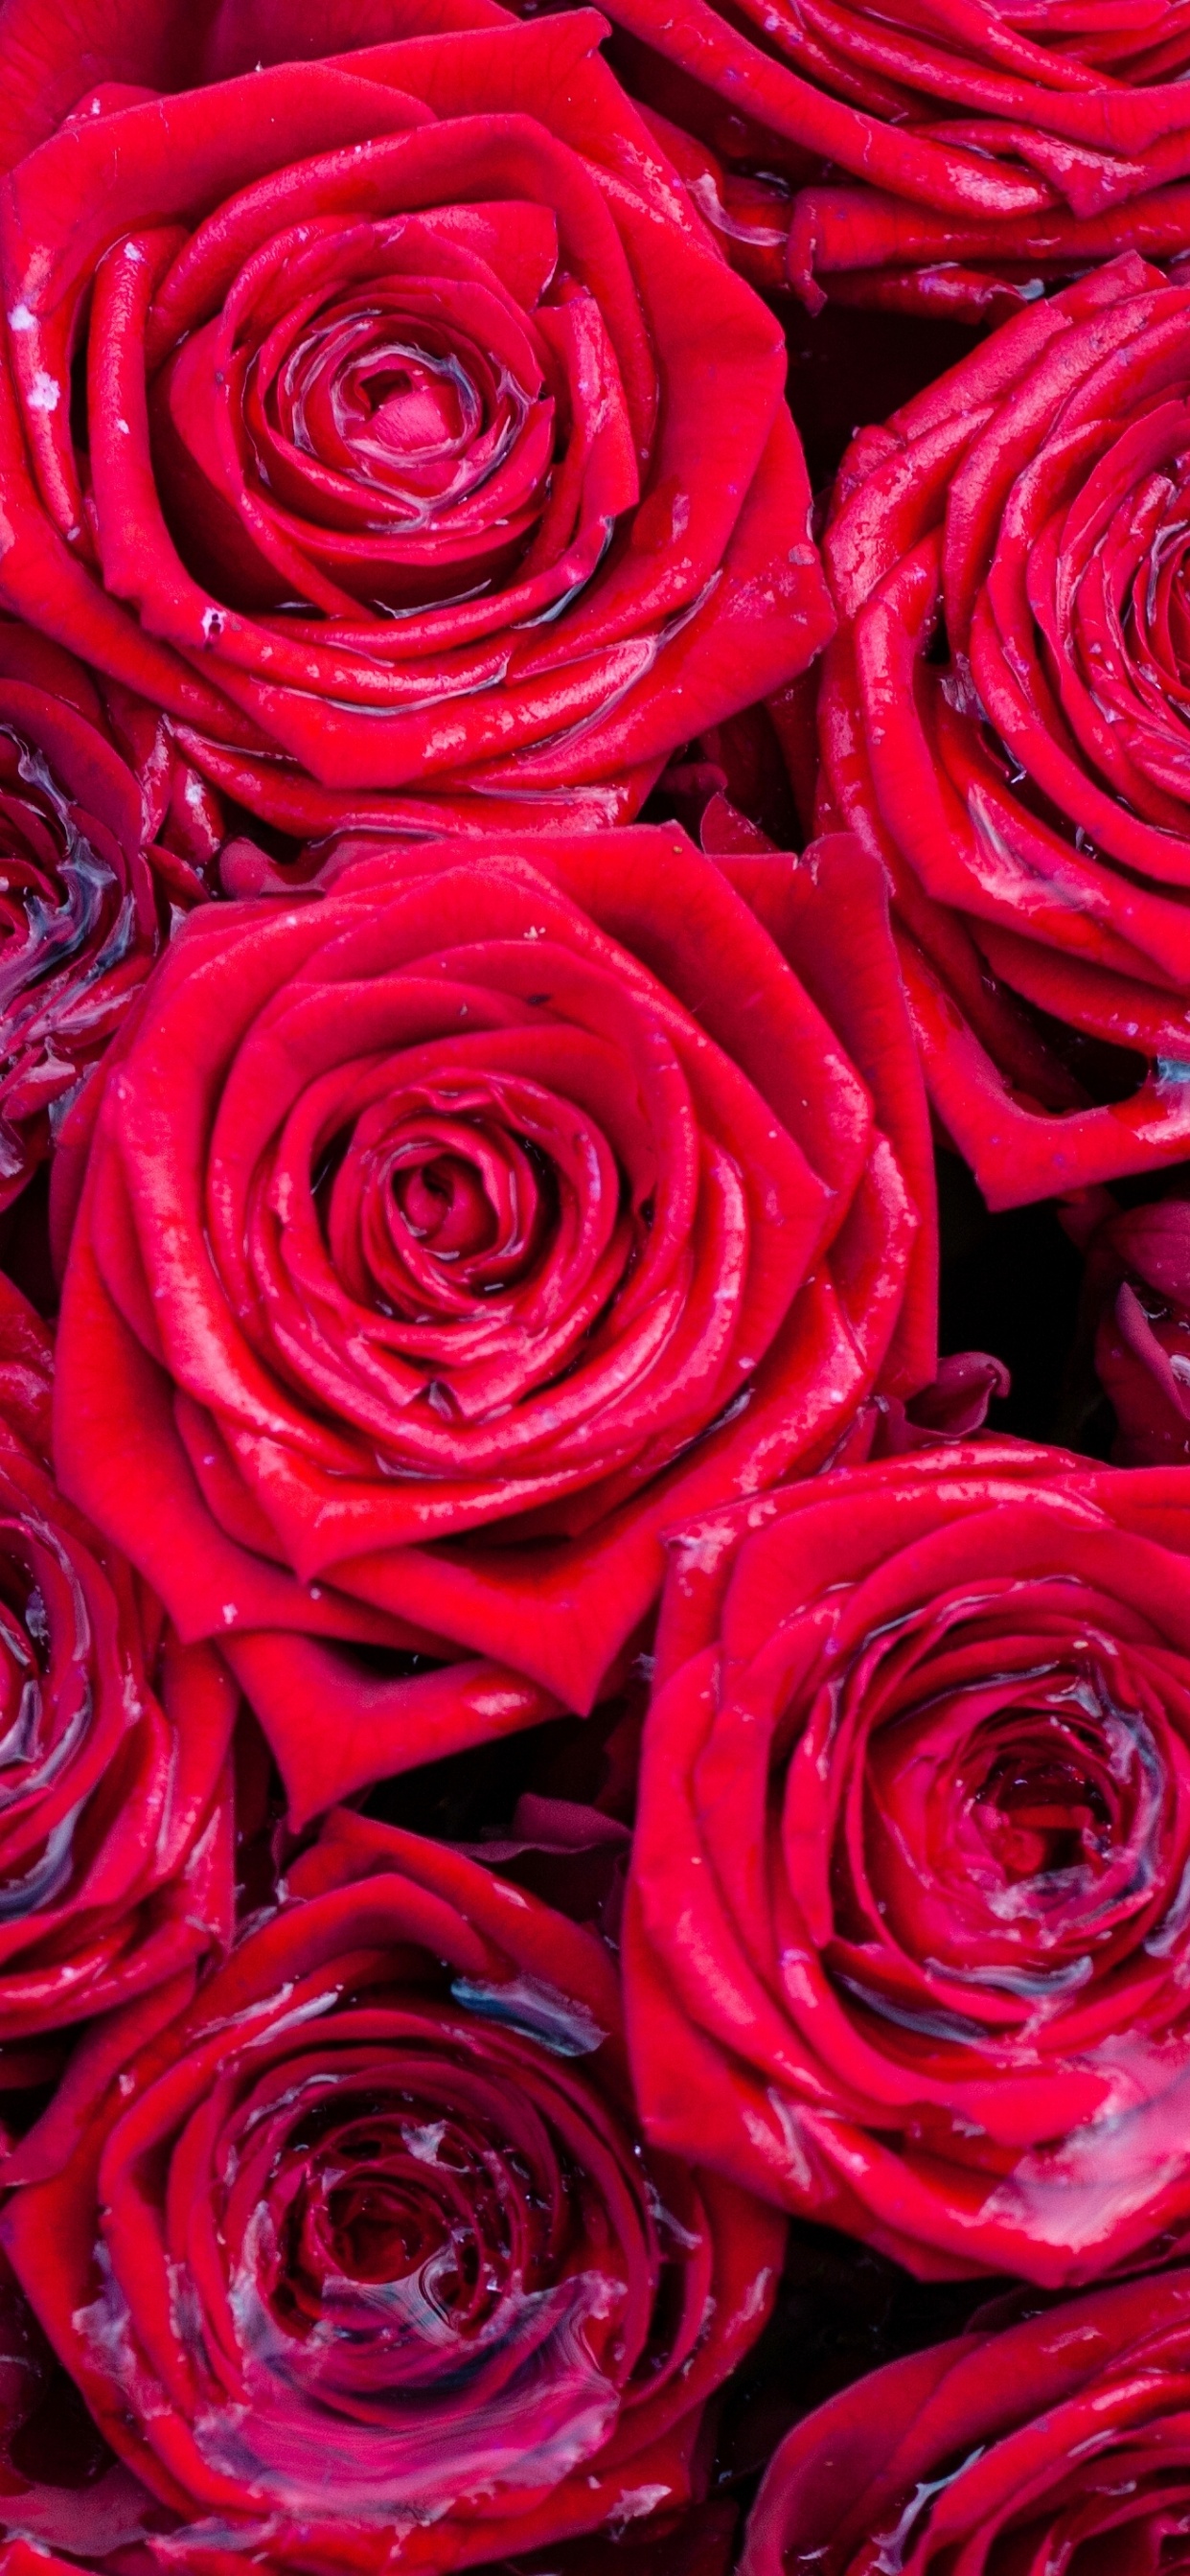 Roses Rouges en Photographie Rapprochée. Wallpaper in 1242x2688 Resolution